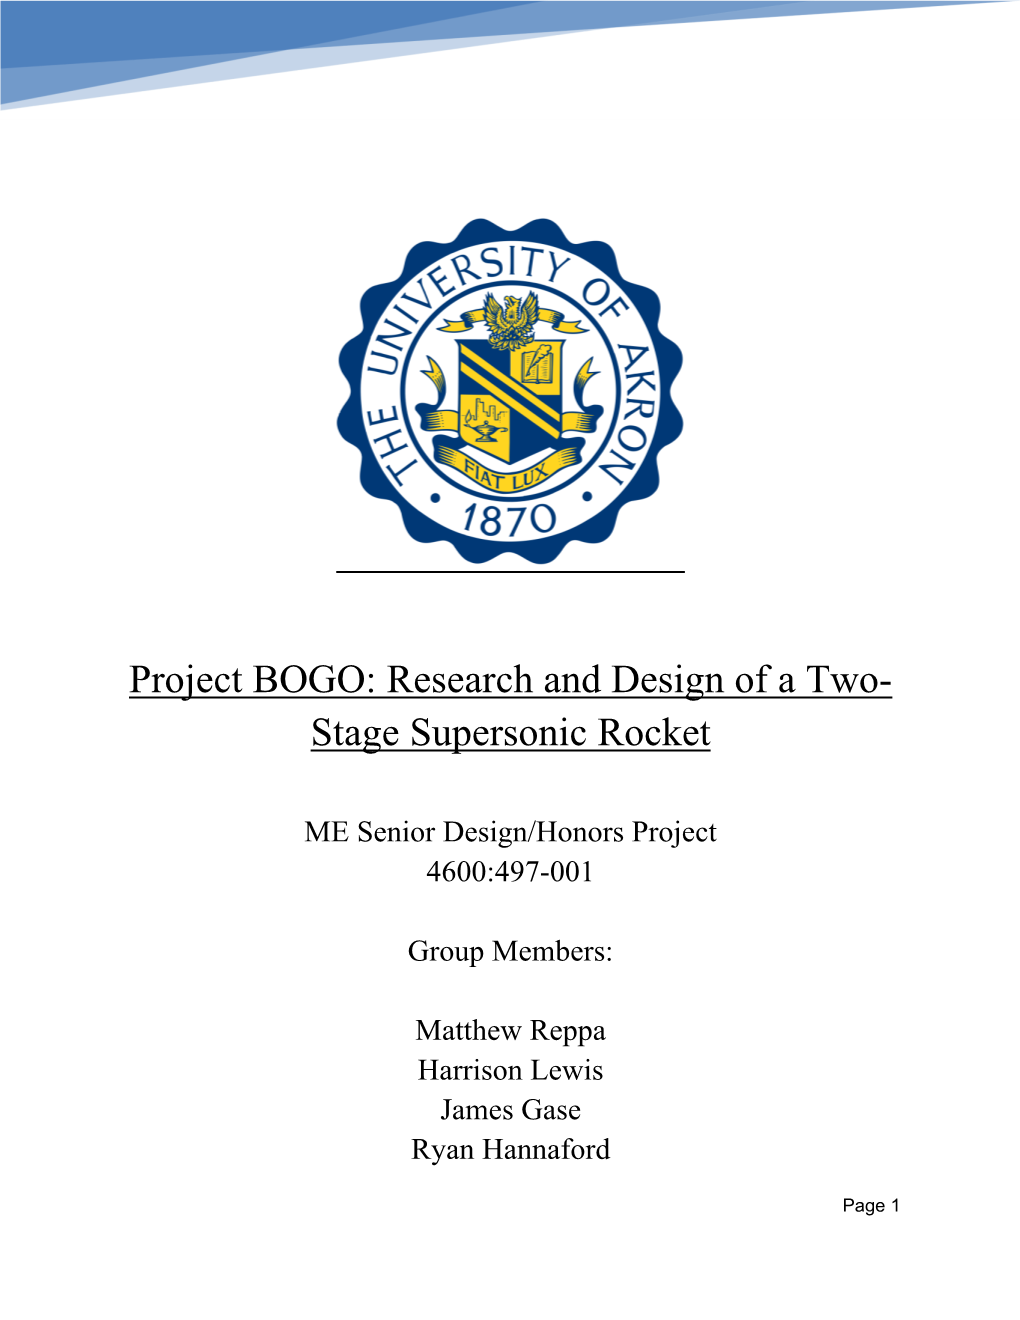 Project BOGO: Research and Design of a Two- Stage Supersonic Rocket